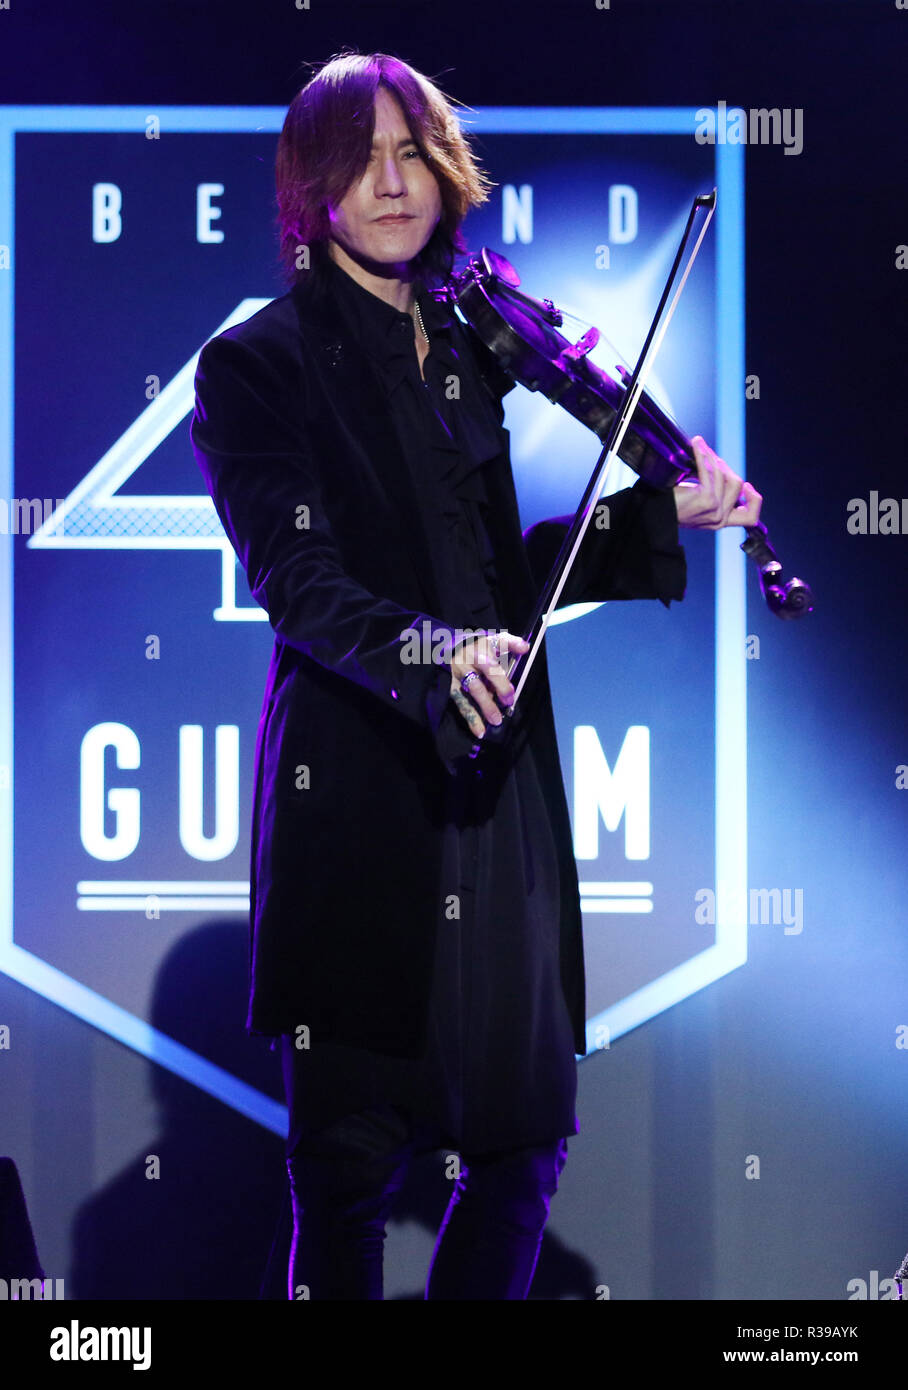 Tokyo, Japan. 21st Nov, 2018. Japanese rock band Luna Sea guitarist SUGIZO plays violin "The Beyond", a theme music for the 40th anniversary of "Mobile Suit GUNDAM", original animation started in 1979, in Tokyo on Wednesday, November 21, 2018. The 18-meter tall robot GUNDAM is expecting to walk in Yokohama in 2020, called "GUNDAM Global Challenge" as a part of the 40th anniversary project of Mobile Suit GUNDAM. Credit: Yoshio Tsunoda/AFLO/Alamy Live News Stock Photo